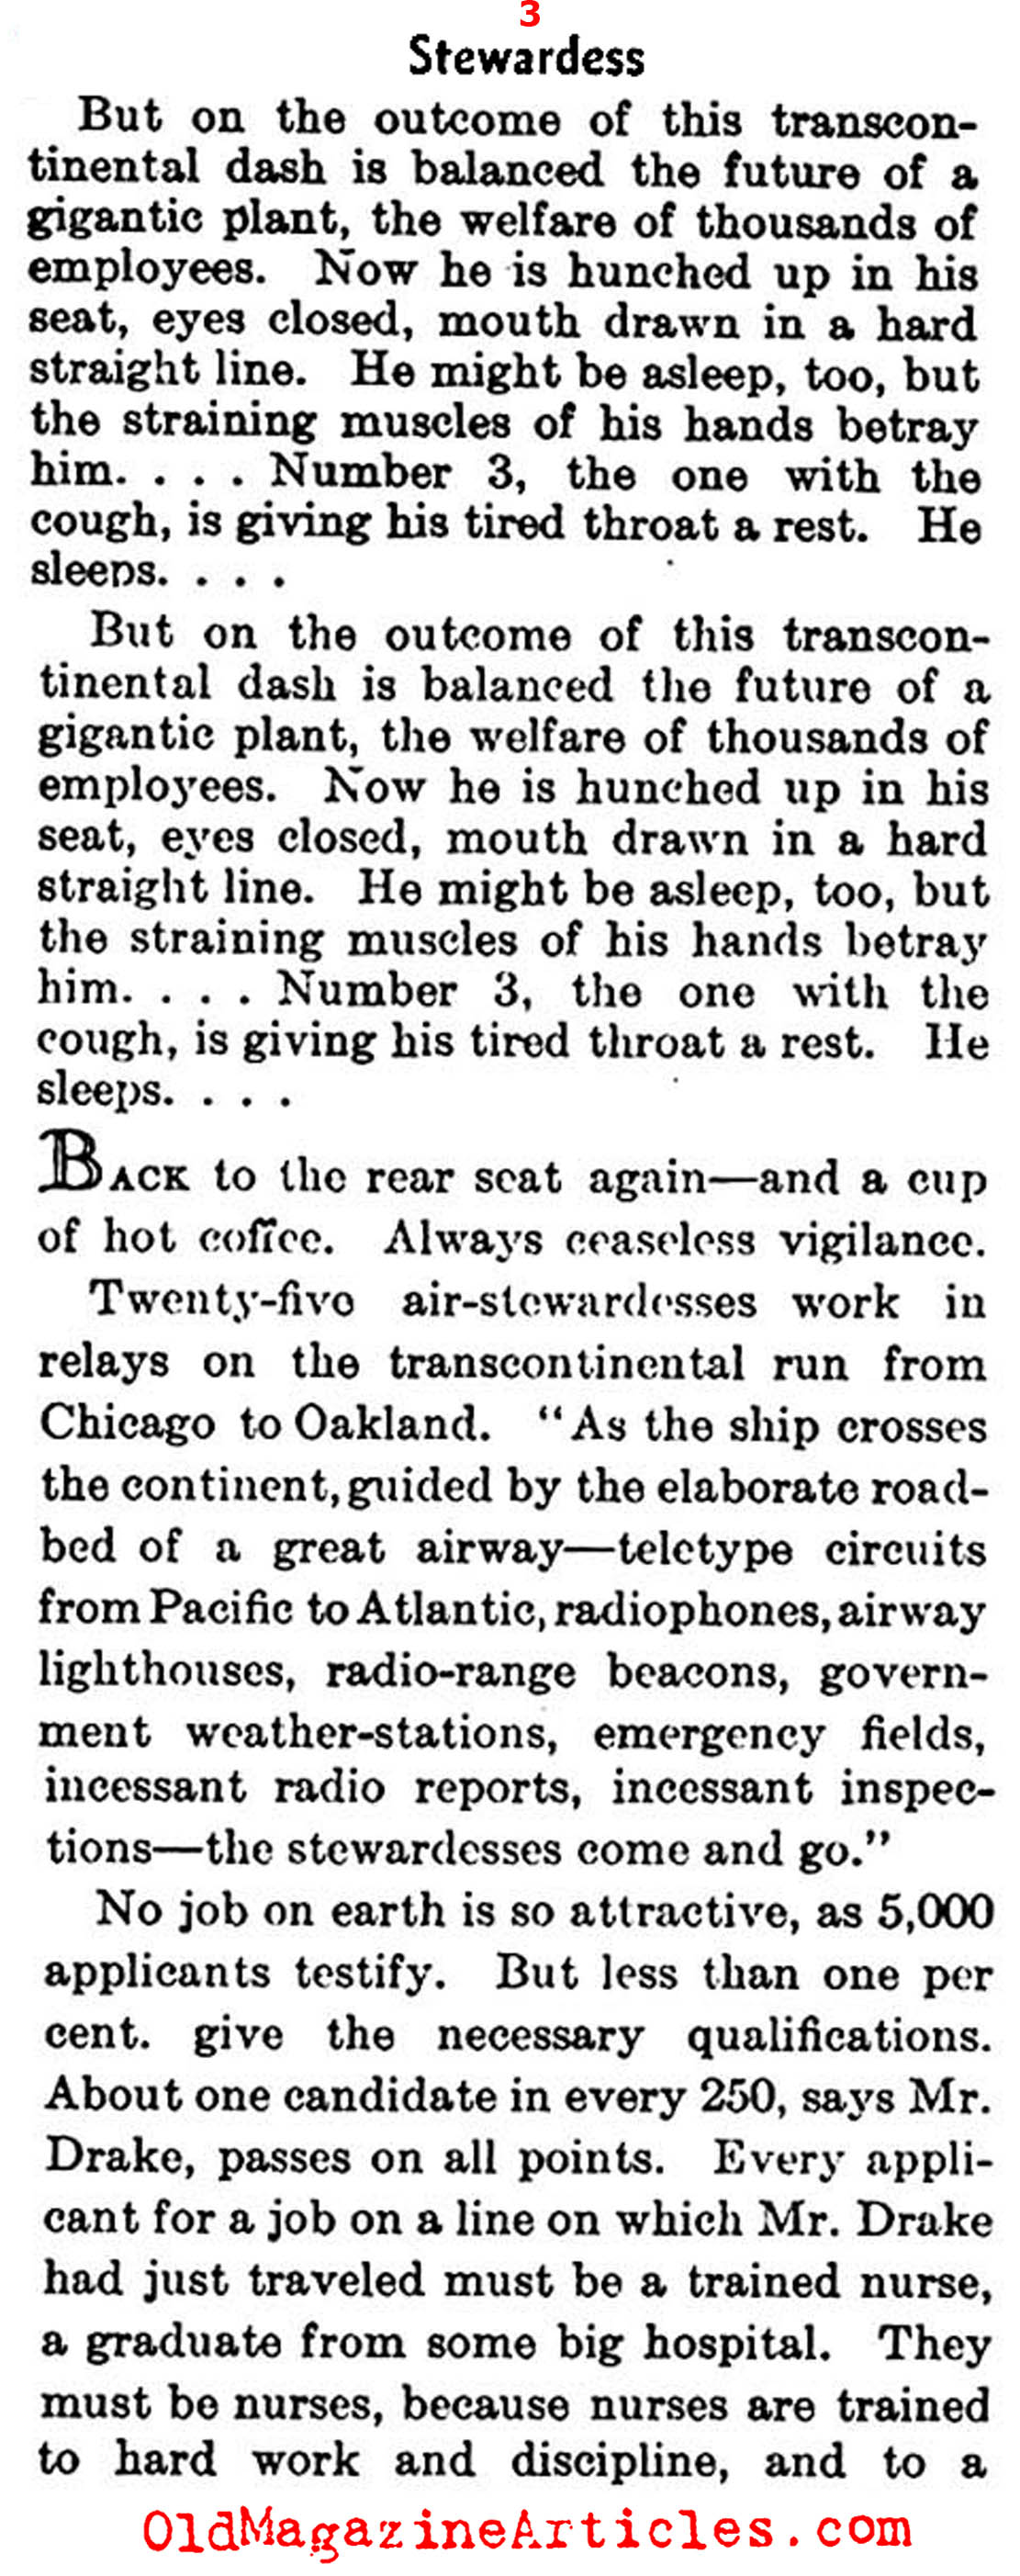 The Earliest Airline Stewardesses (The Literary Digest, 1933)